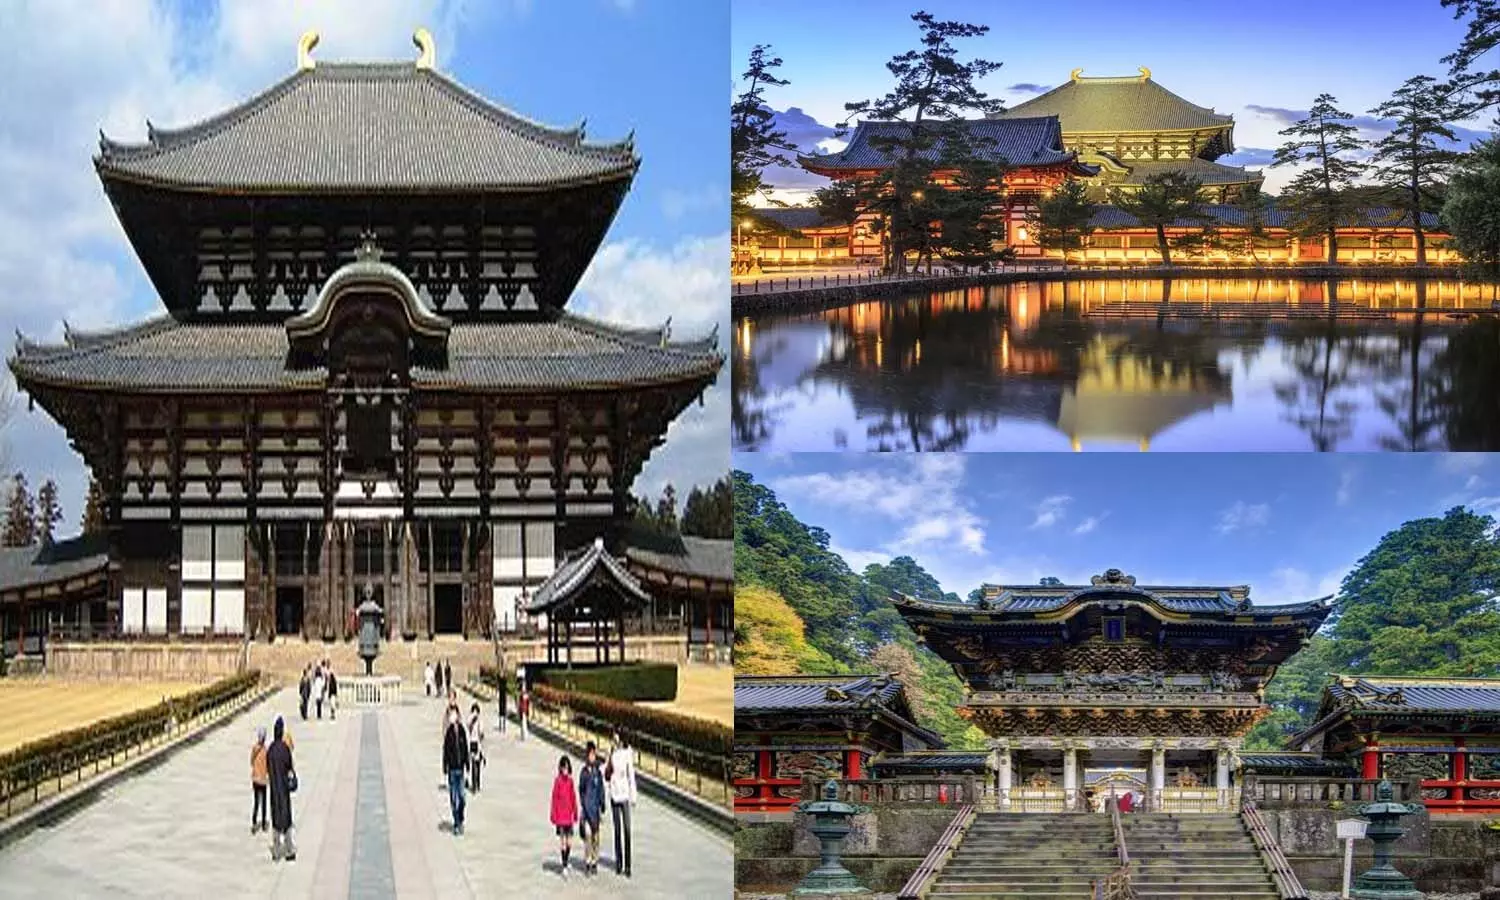 Assassination of Shinzo Abe: Know the history of the city of Nara and what is the situation here